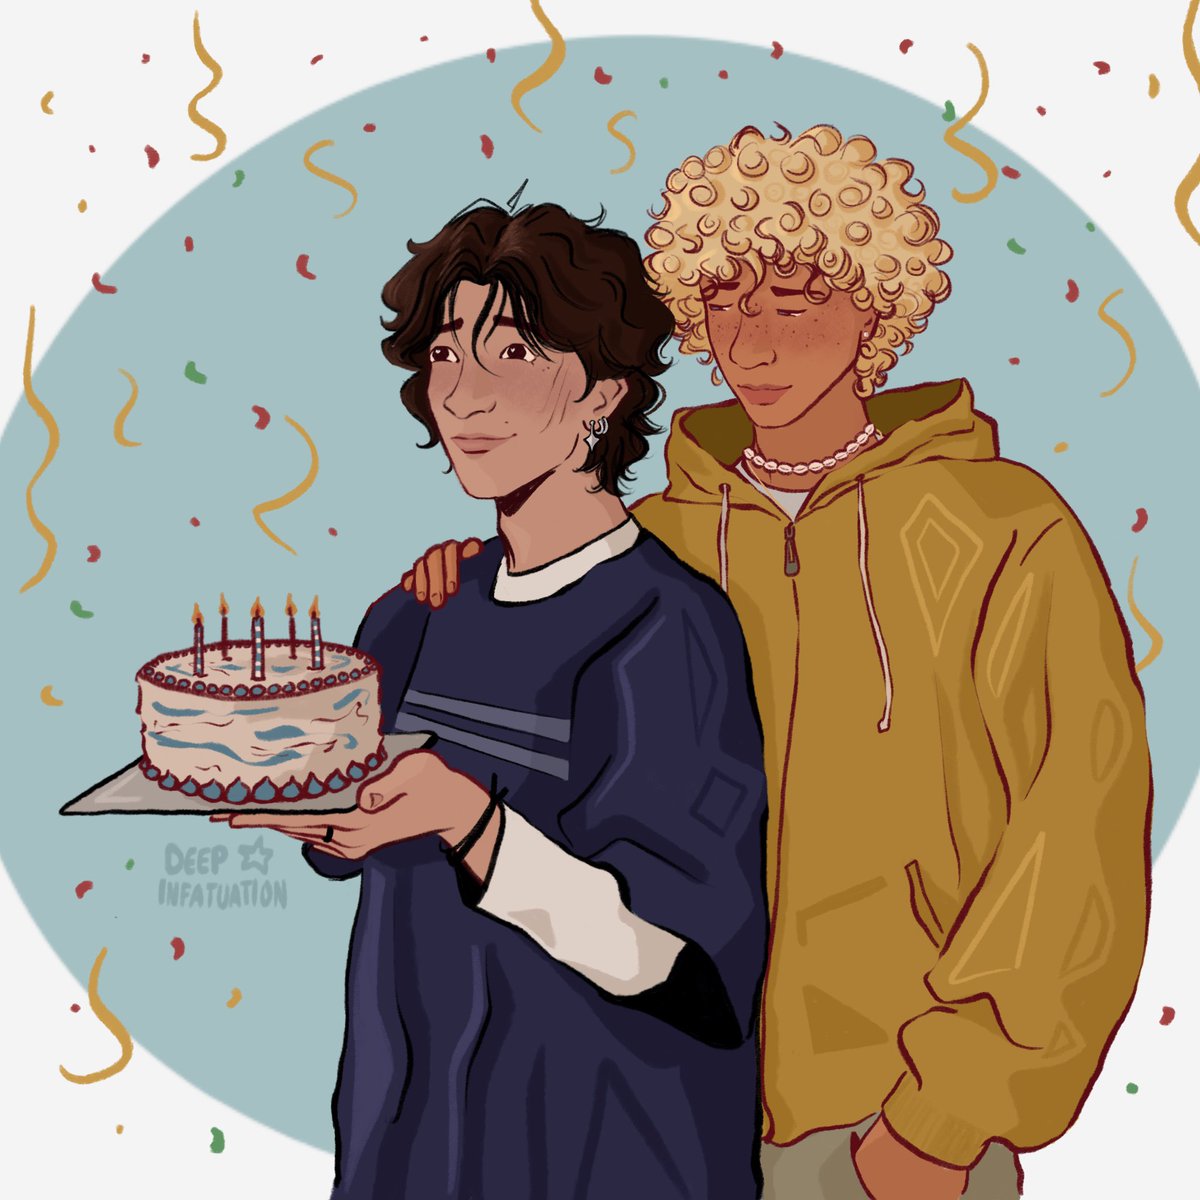 i never posted this for my birthday last weekend, but here is solangelo celebrating with me (cause i'm self indulgent) 🎊

#solangelo #pjo #fanart #nicodiangelo #willsolace